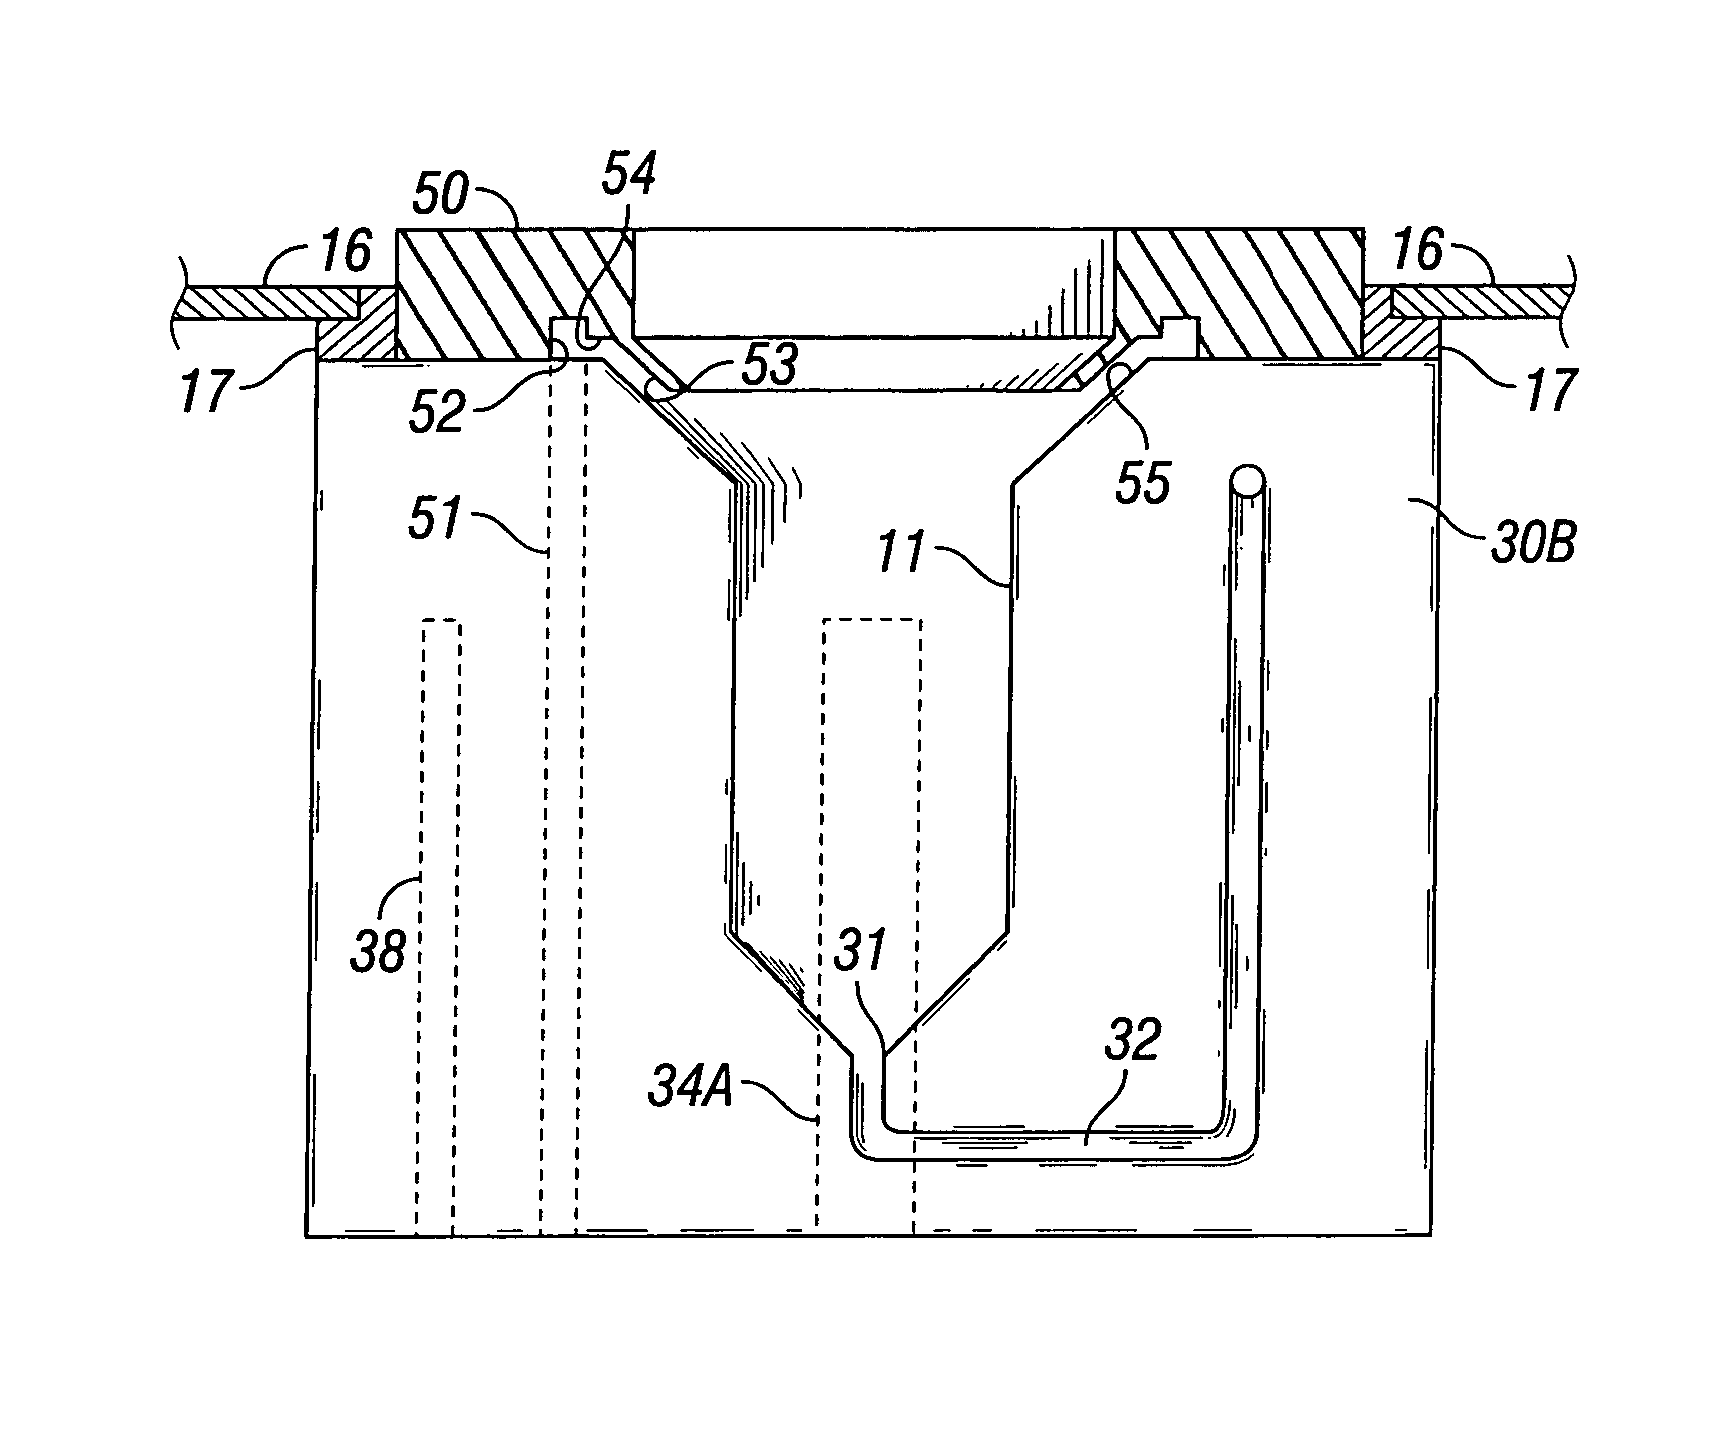 Apparatus for heating liquid samples for analysis